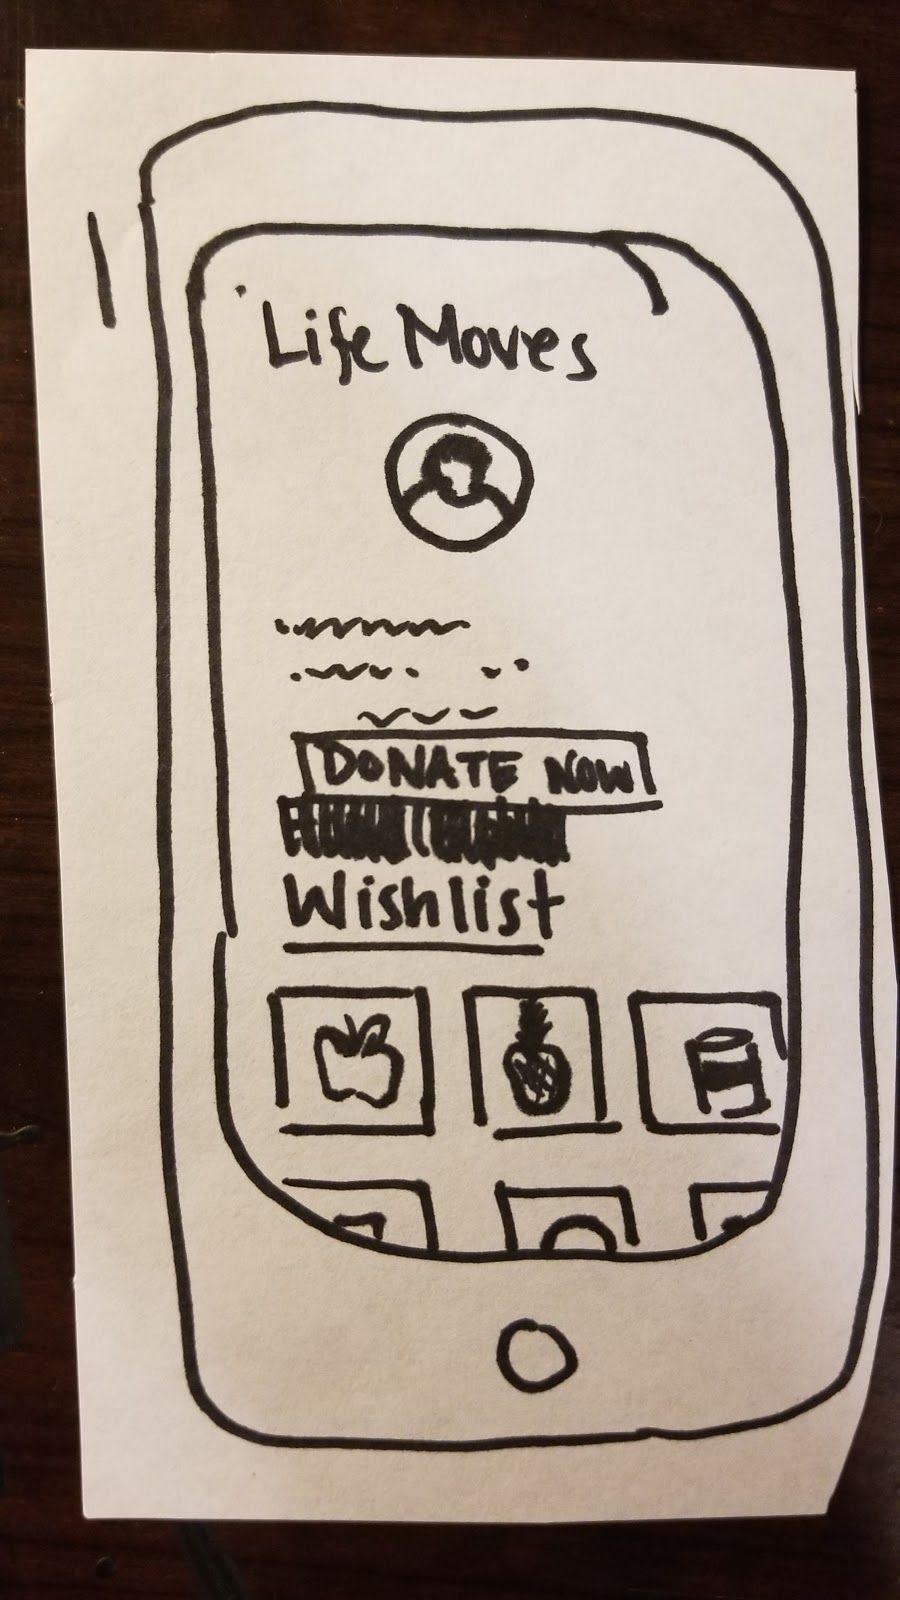 At this stage, the app now included learning/donating to all